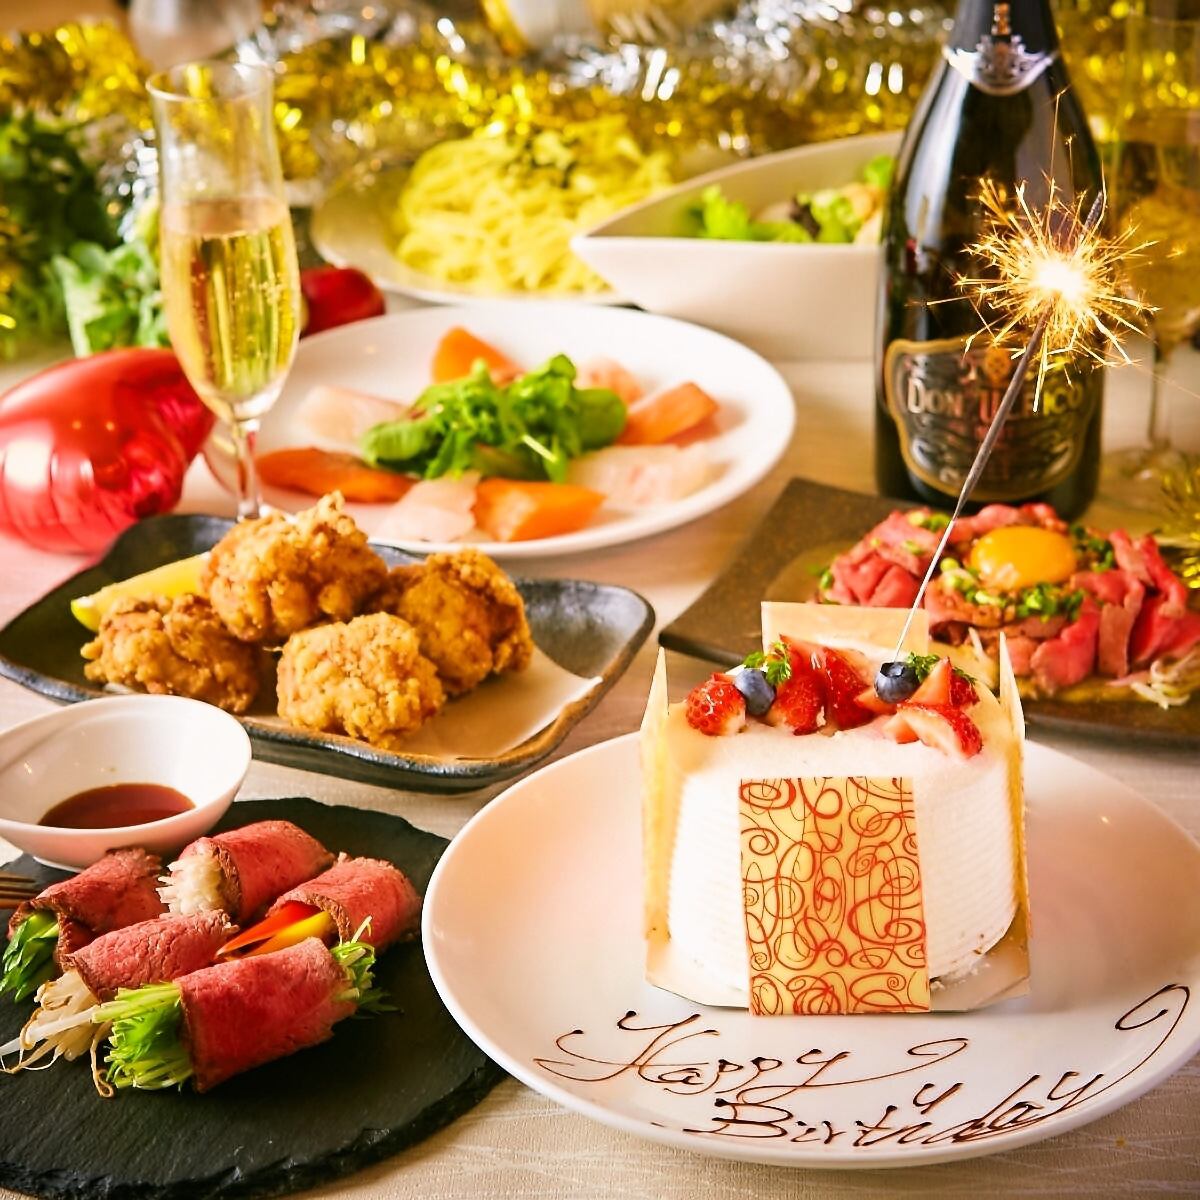 Perfect for birthdays ◎Cheers course with sparkling wine is also available♪